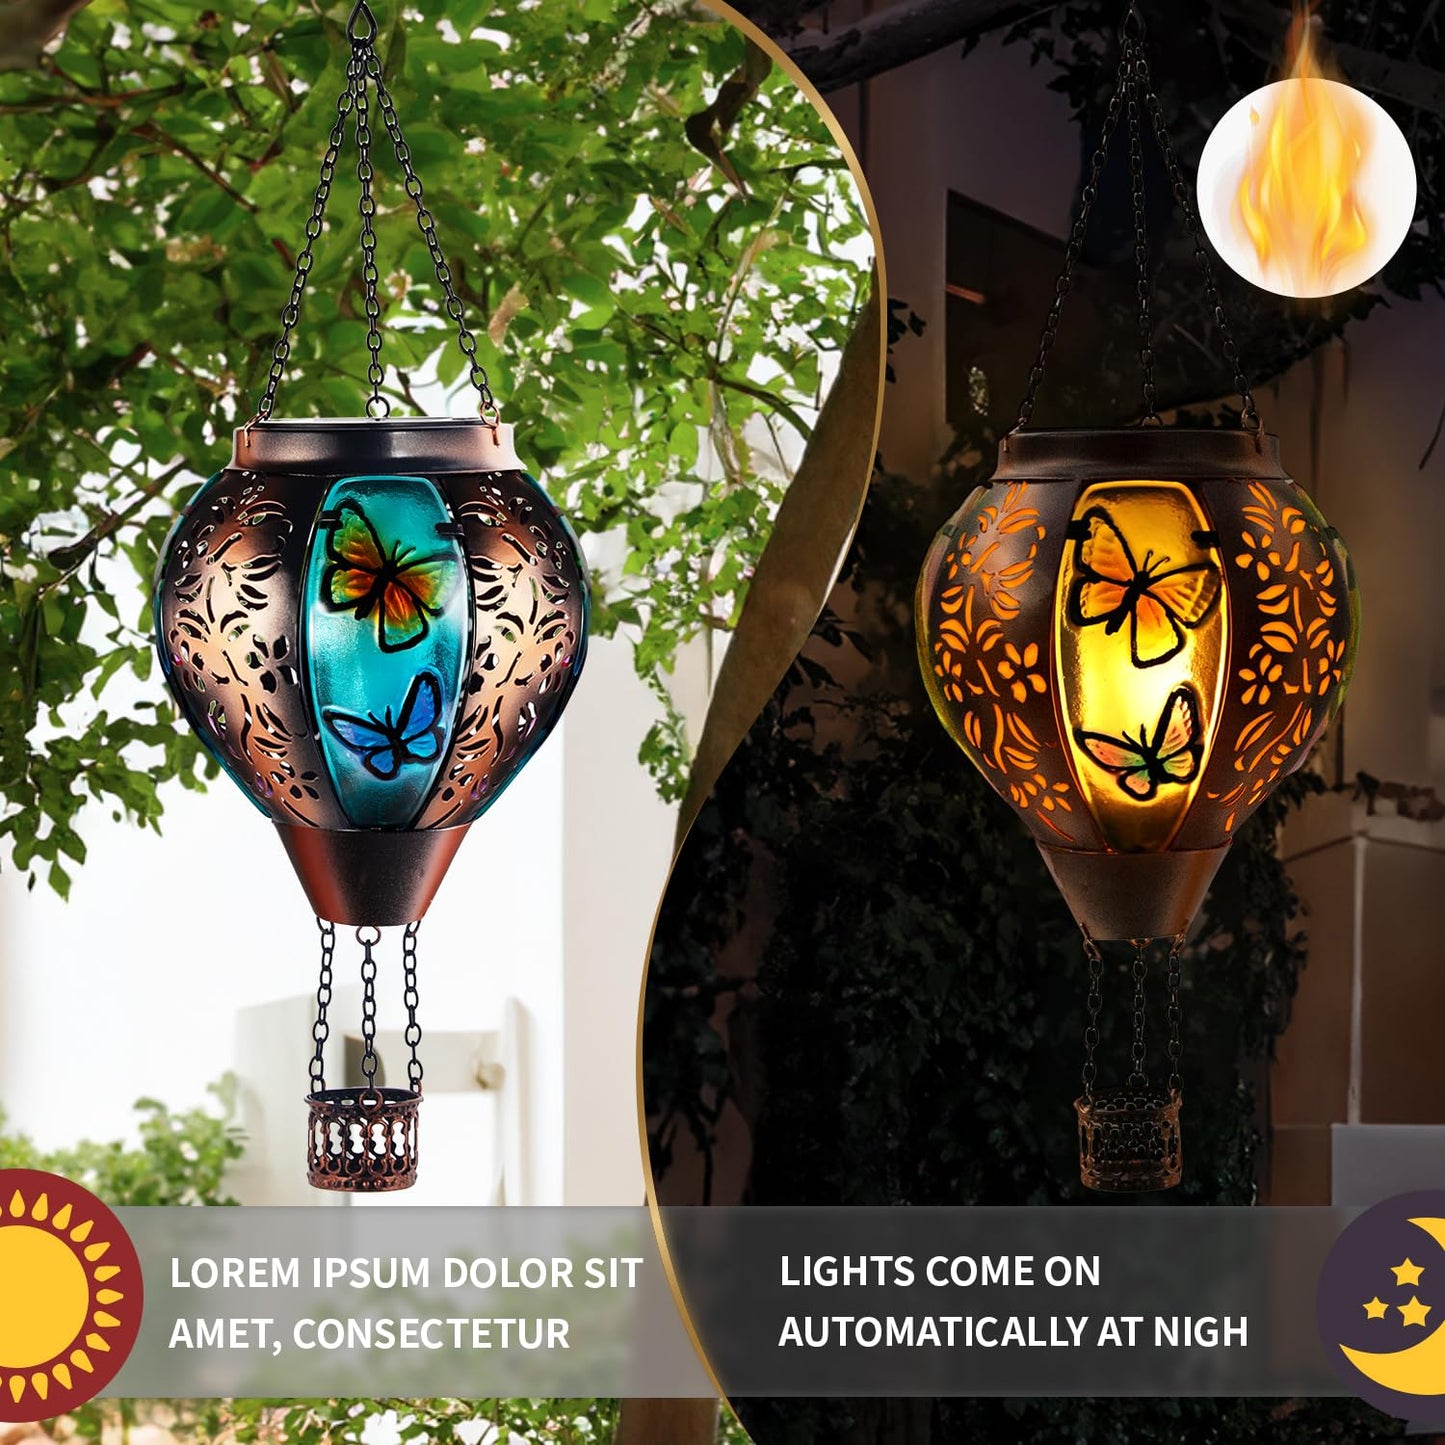 Hot Air Balloon Solar Lantern Butterfly Lights with Flickering Flame Solar Powered LED Lights Outdoor Waterproof Decorative Hanging Lights for Garden Patio Pathway Yard Porch Decor